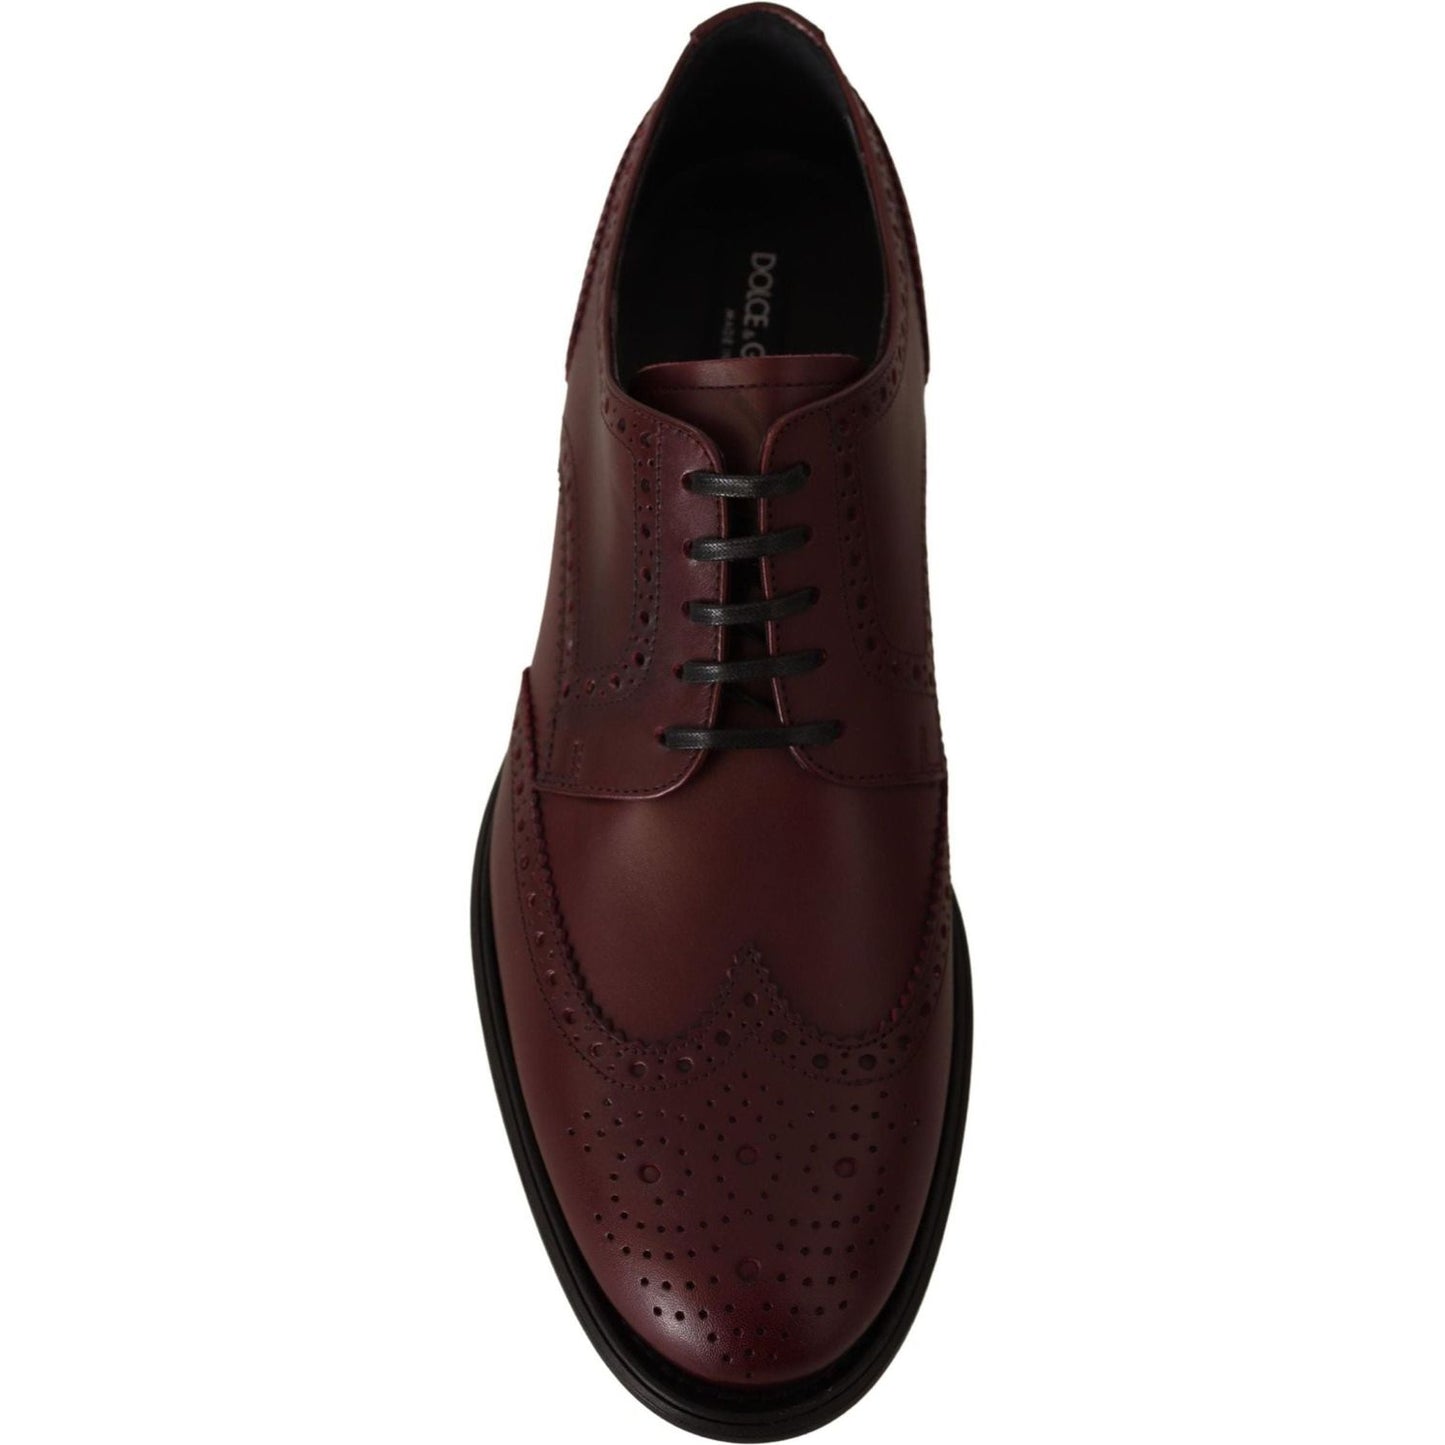 Dolce & Gabbana Elegant Bordeaux Leather Derby Shoes bordeaux-leather-oxford-wingtip-formal-shoes IMG_4875-scaled-a512089b-448.jpg